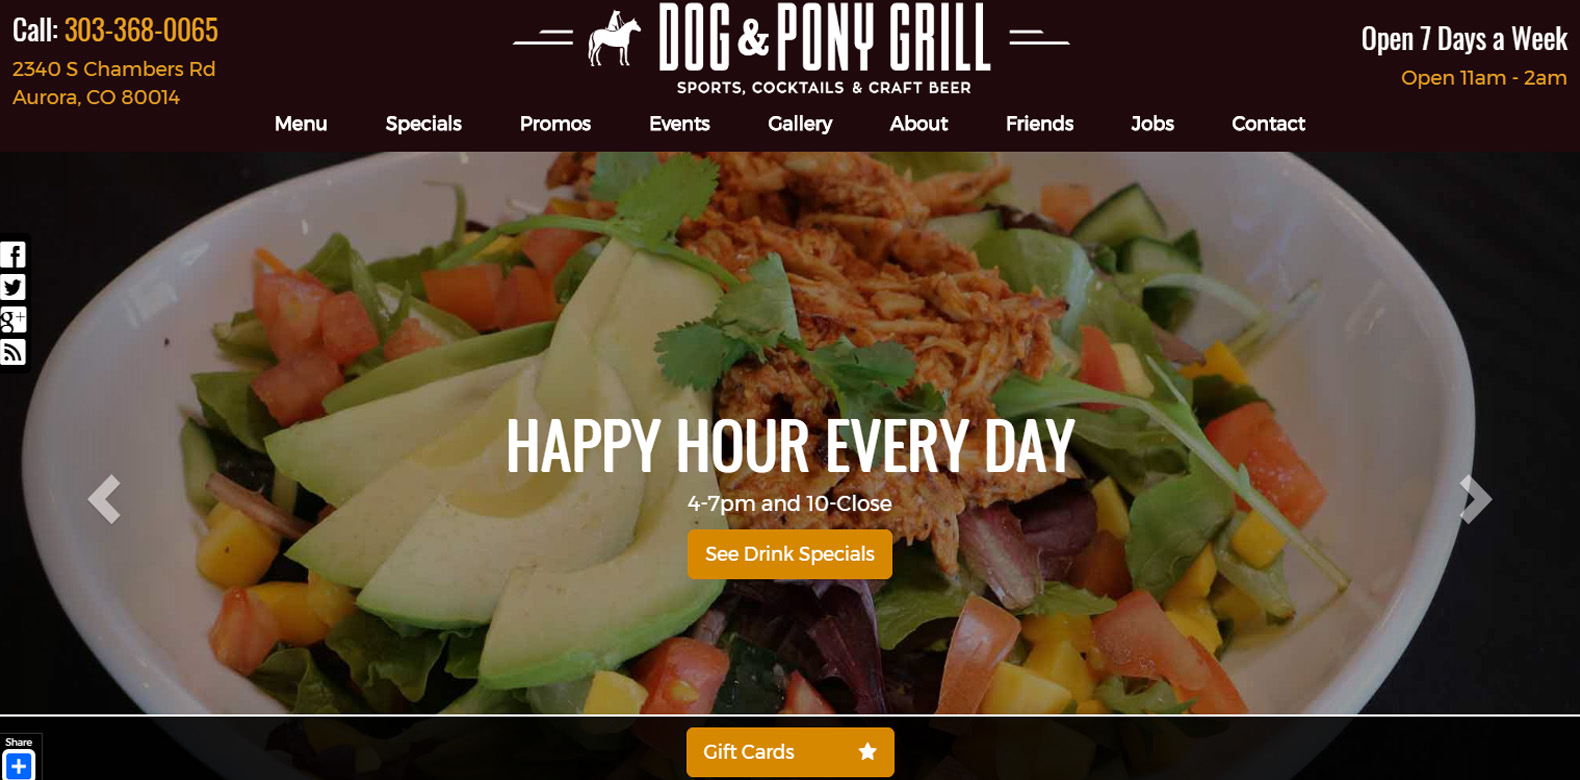 
New Website Launch: The Dog & Pony Grill